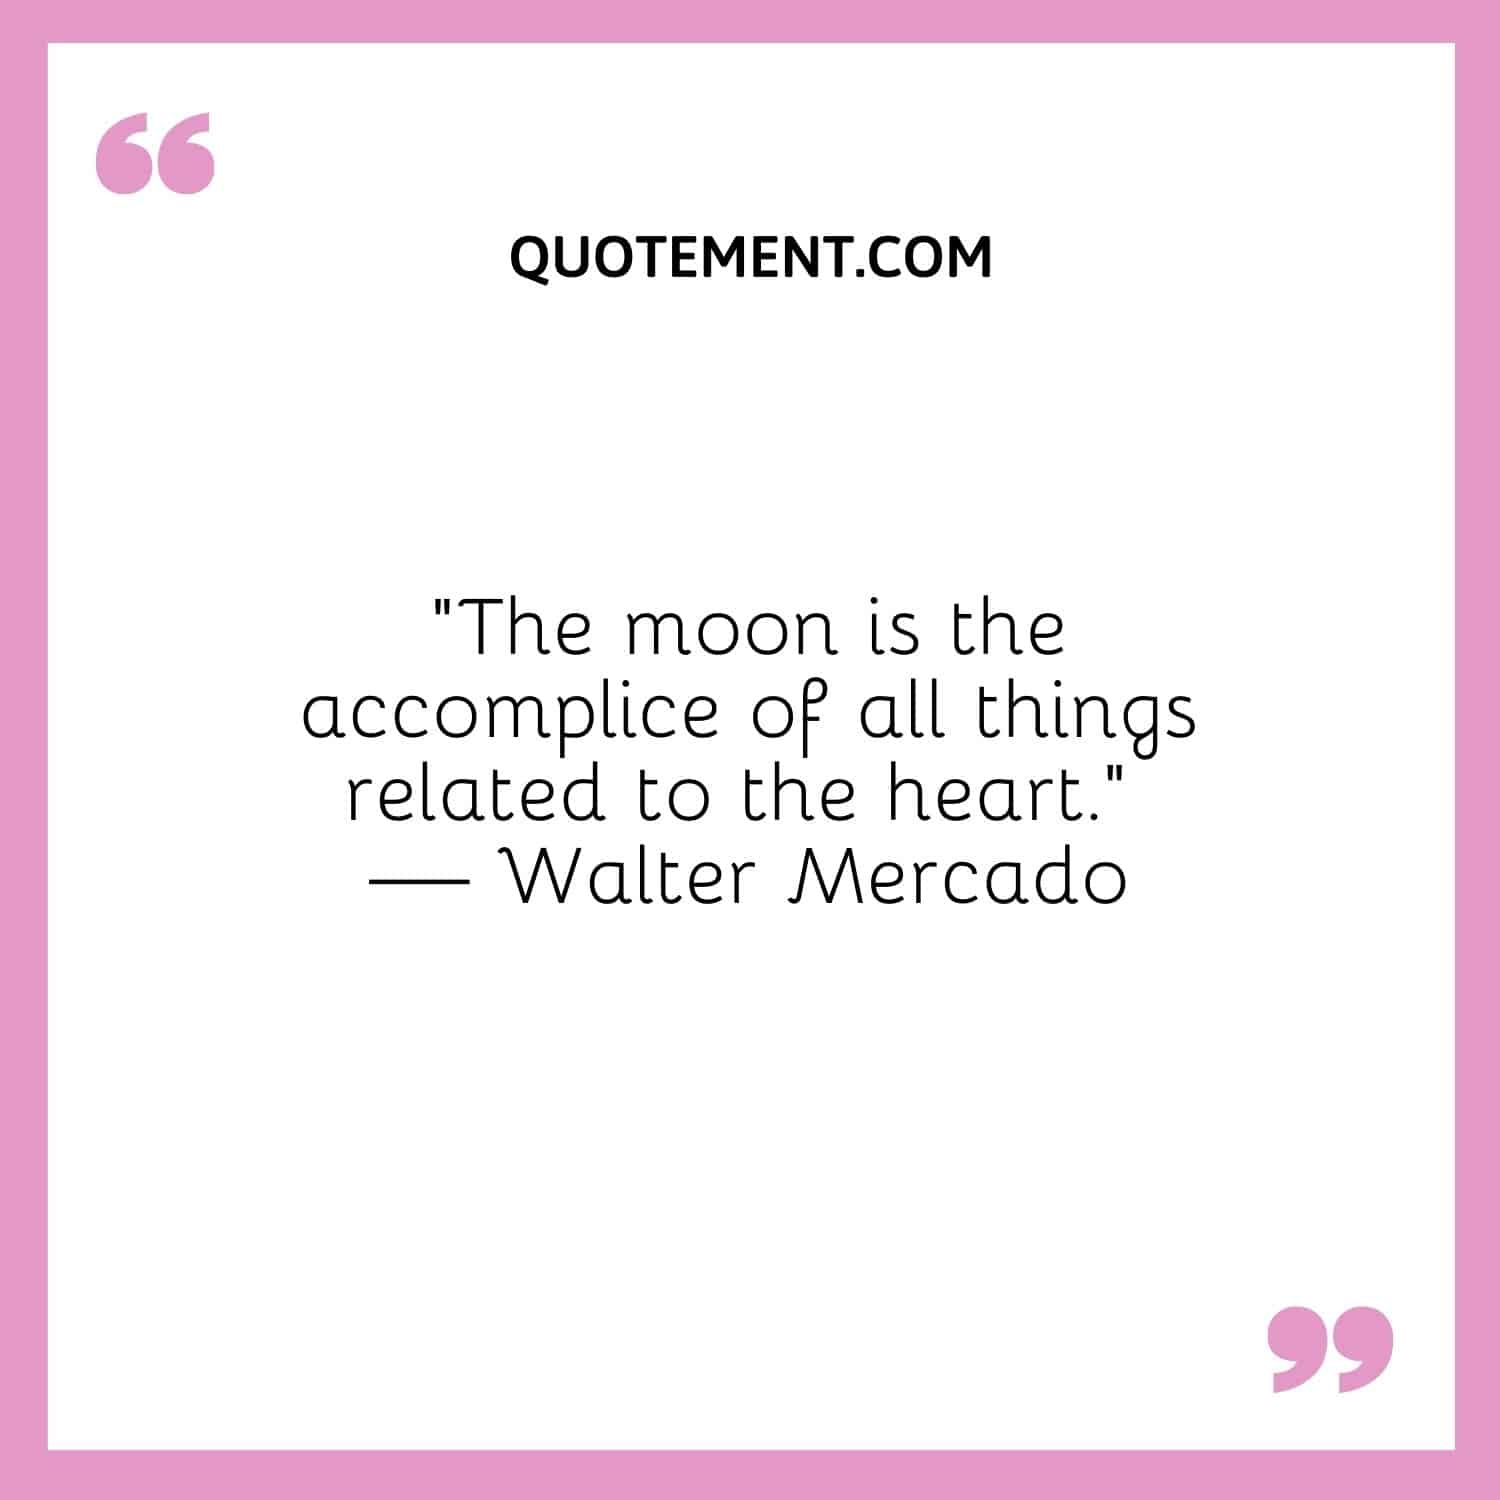 “The moon is the accomplice of all things related to the heart.” — Walter Mercado